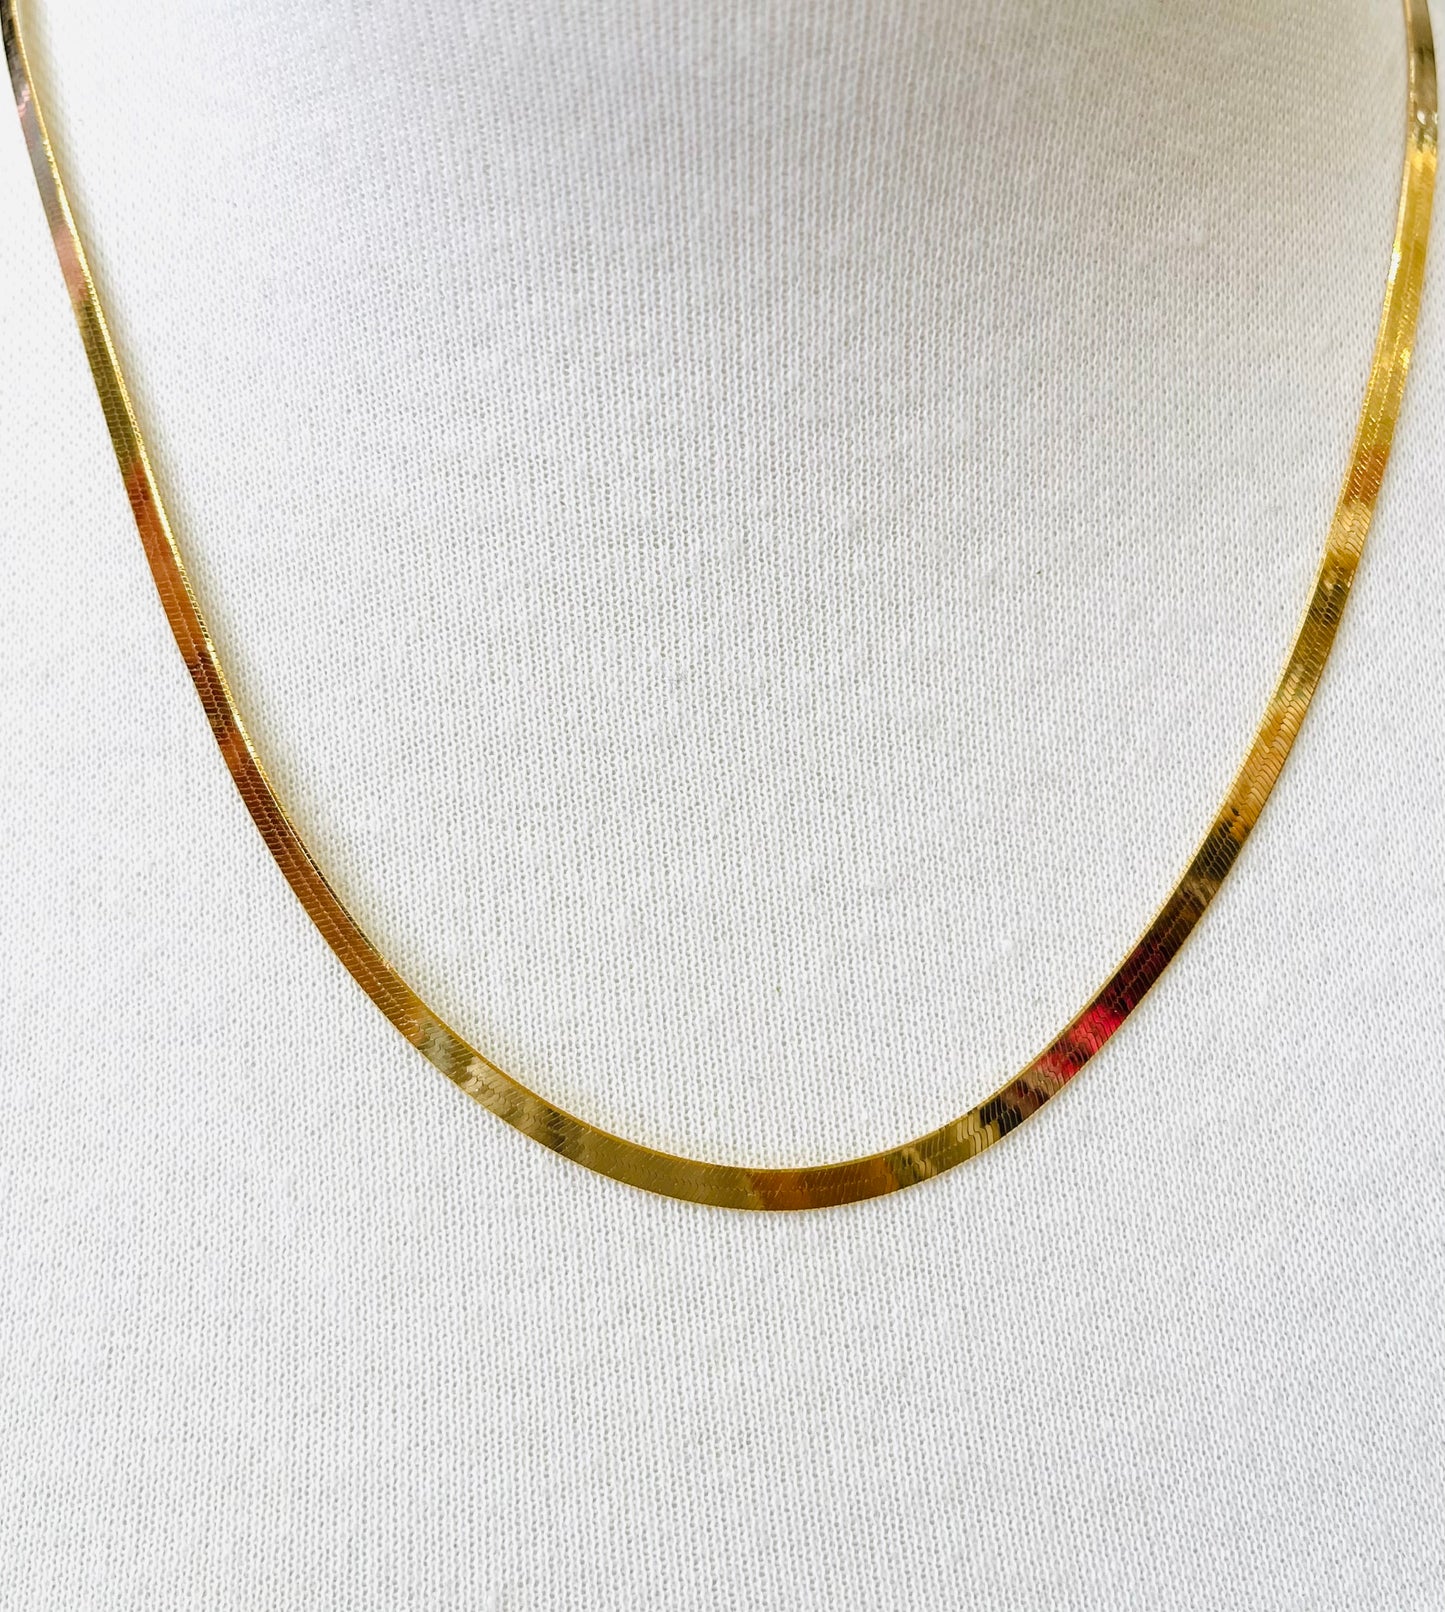 Gold Flat Chain Necklace